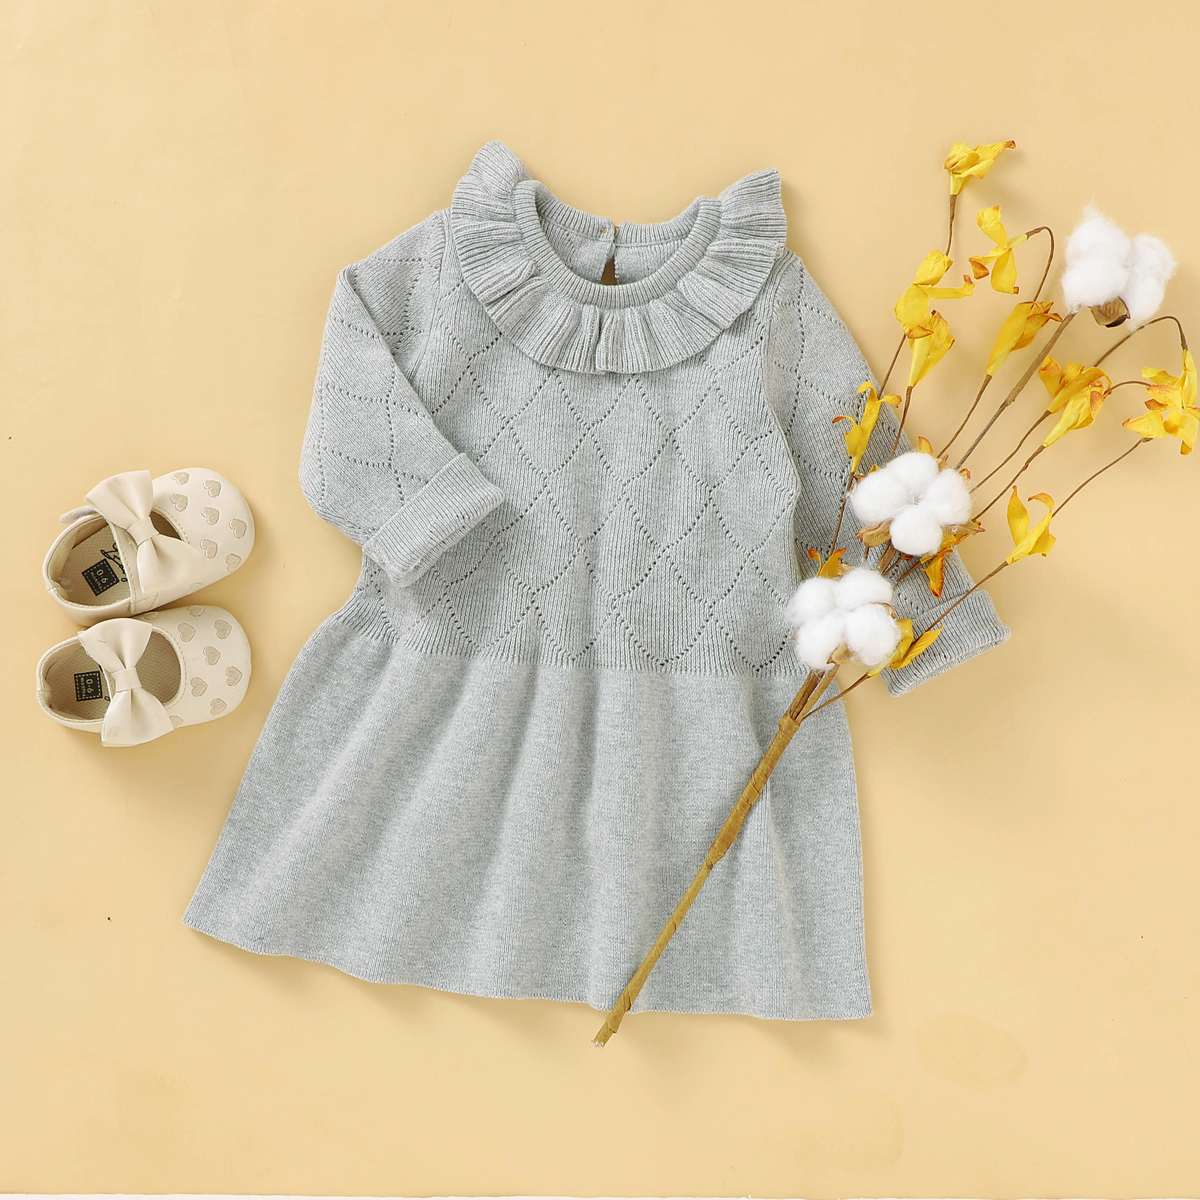 Infant Newborn Baby Girls Sweaters Dress Hollow Out Knitted Long Sleeve Ruffled Gown Solid Autumn Winter Dresses